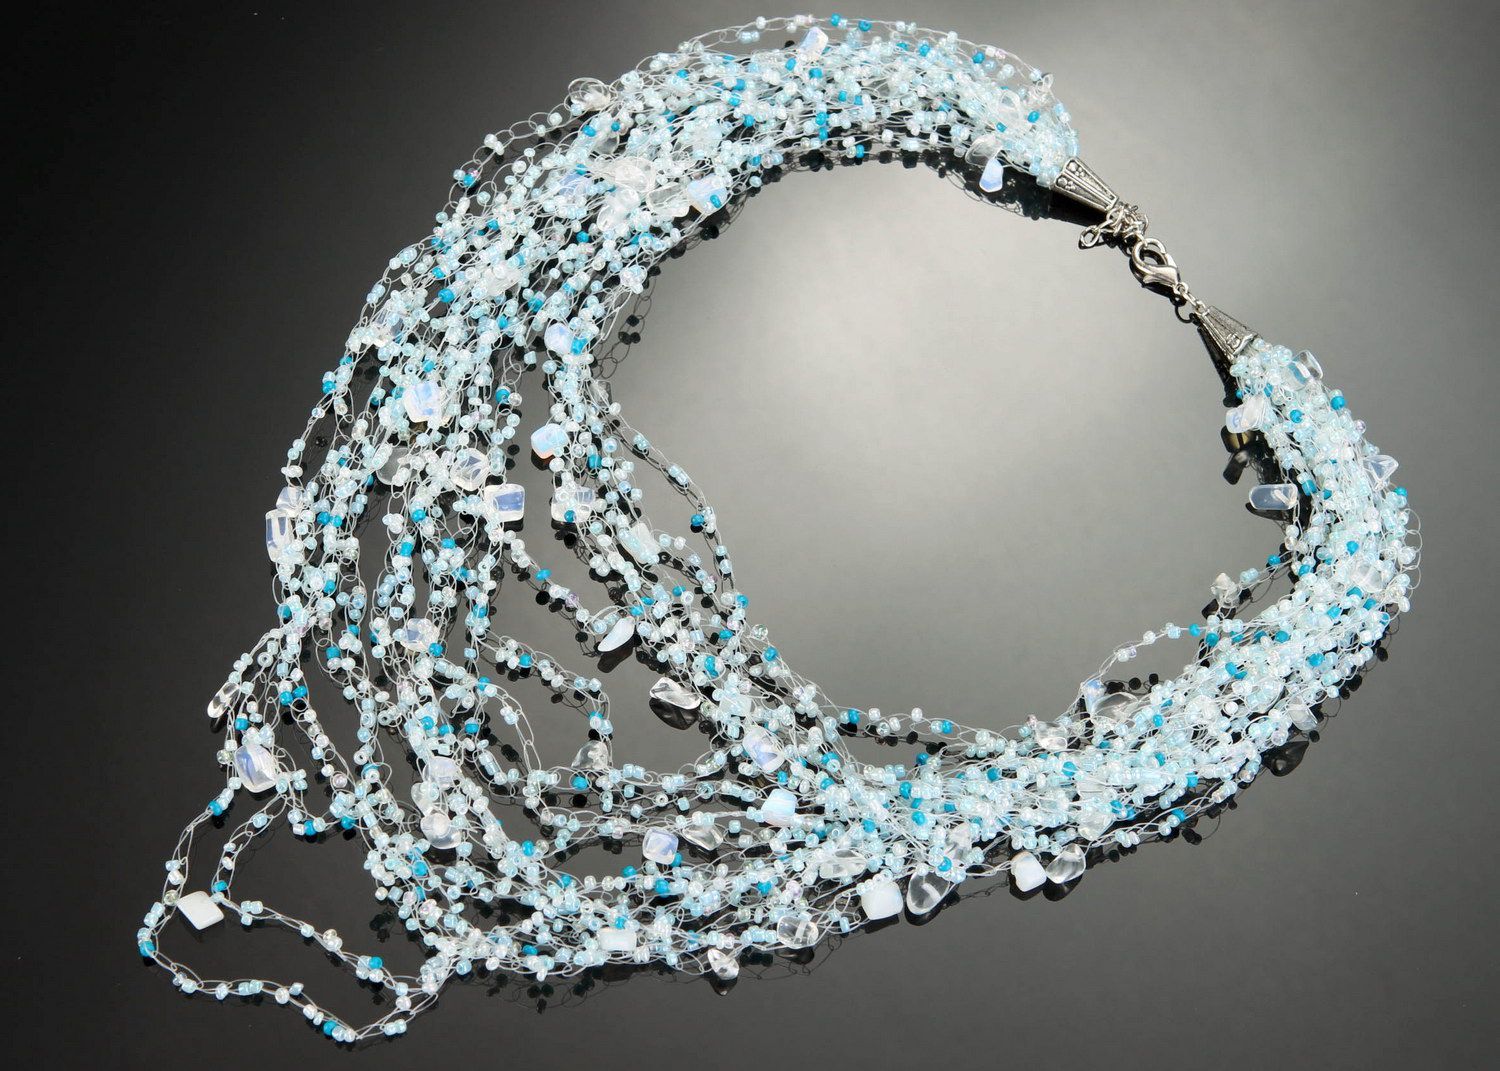 Necklace made of opal fragments photo 2